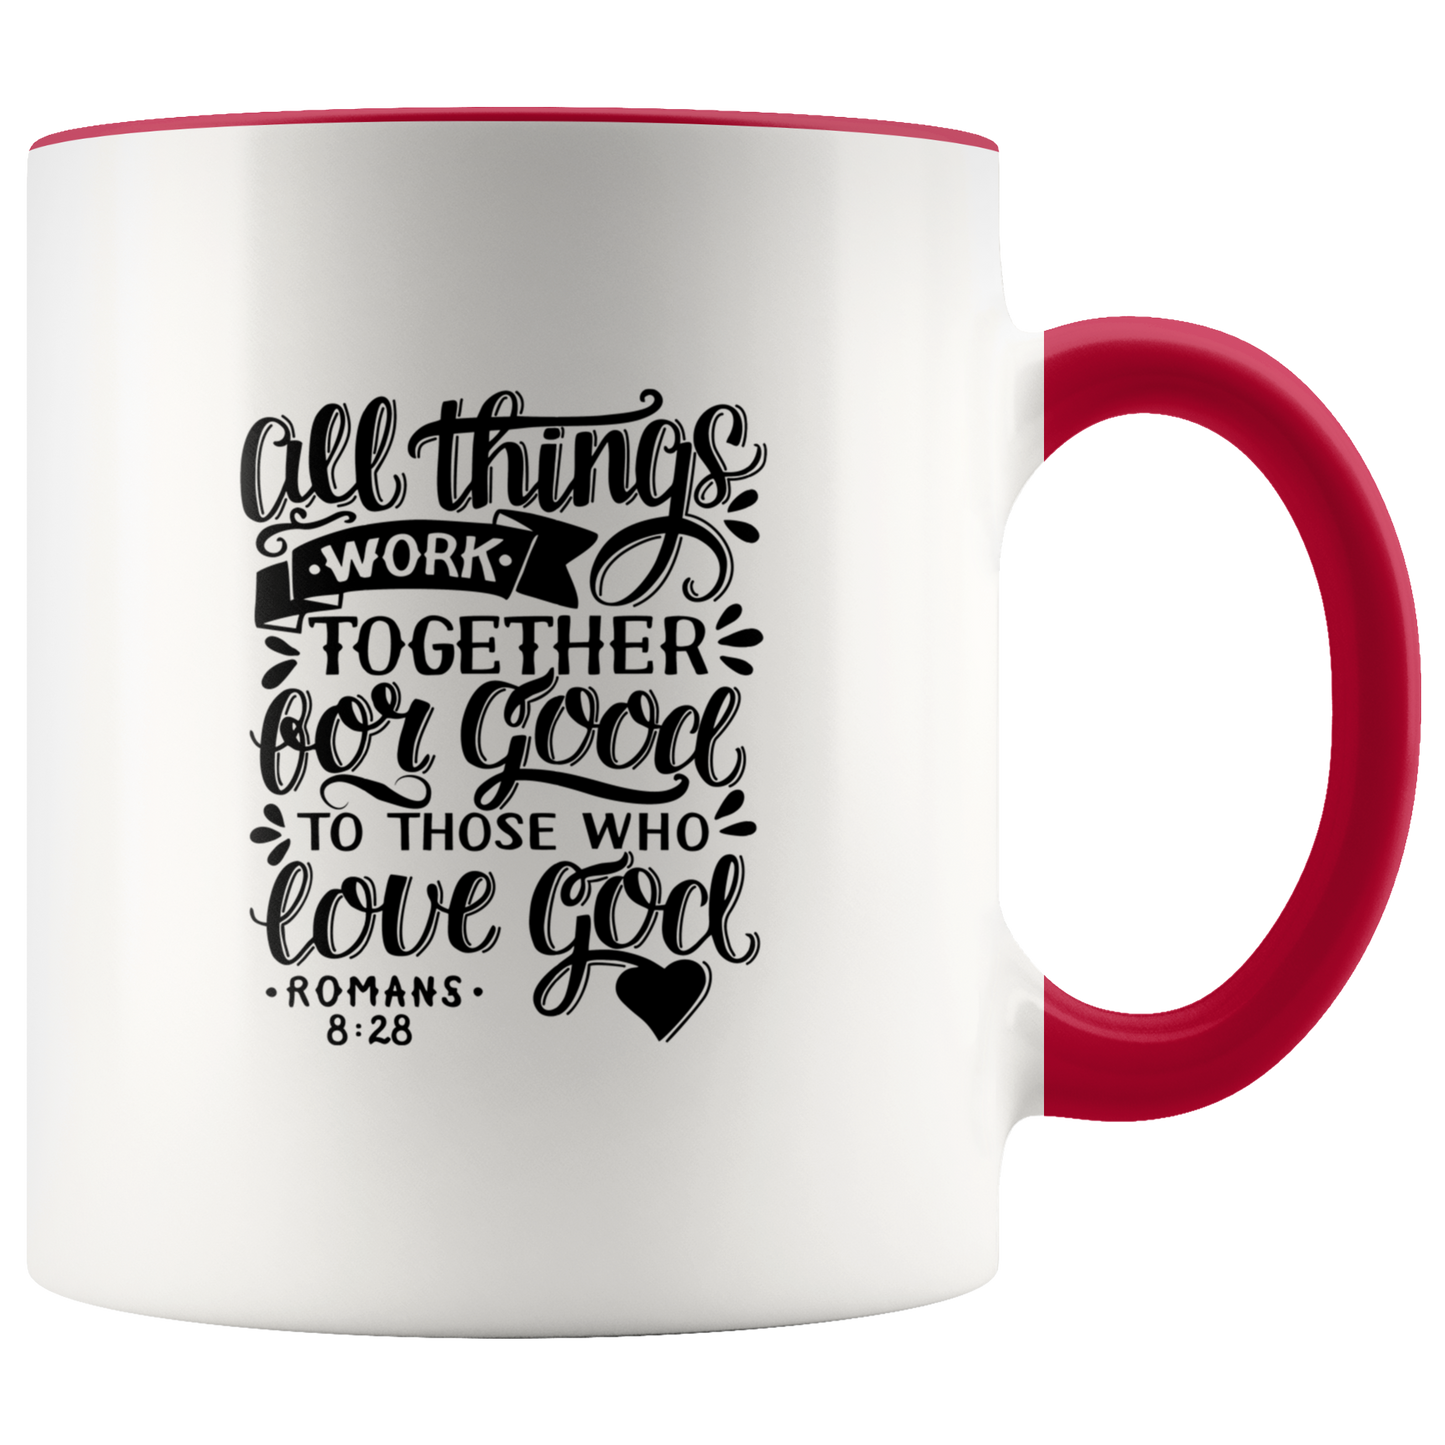 All Things Work Together For Good To Those Who Love God, Romans 8:28 - Accent Mug cardinal red